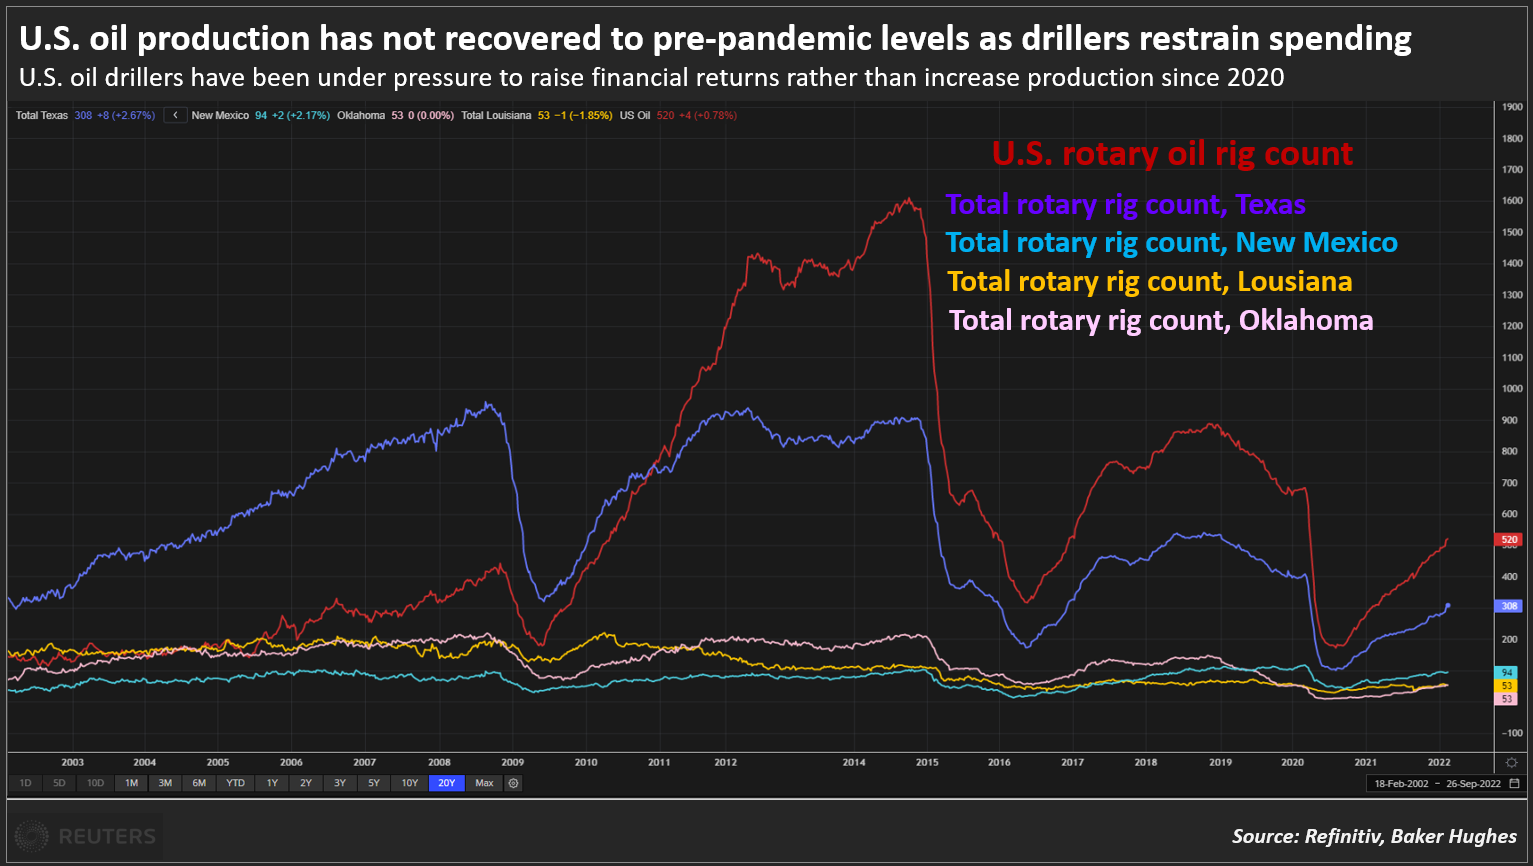 U.S. oil production has not recovered to pre-pandemic levels as drillers restrain spending